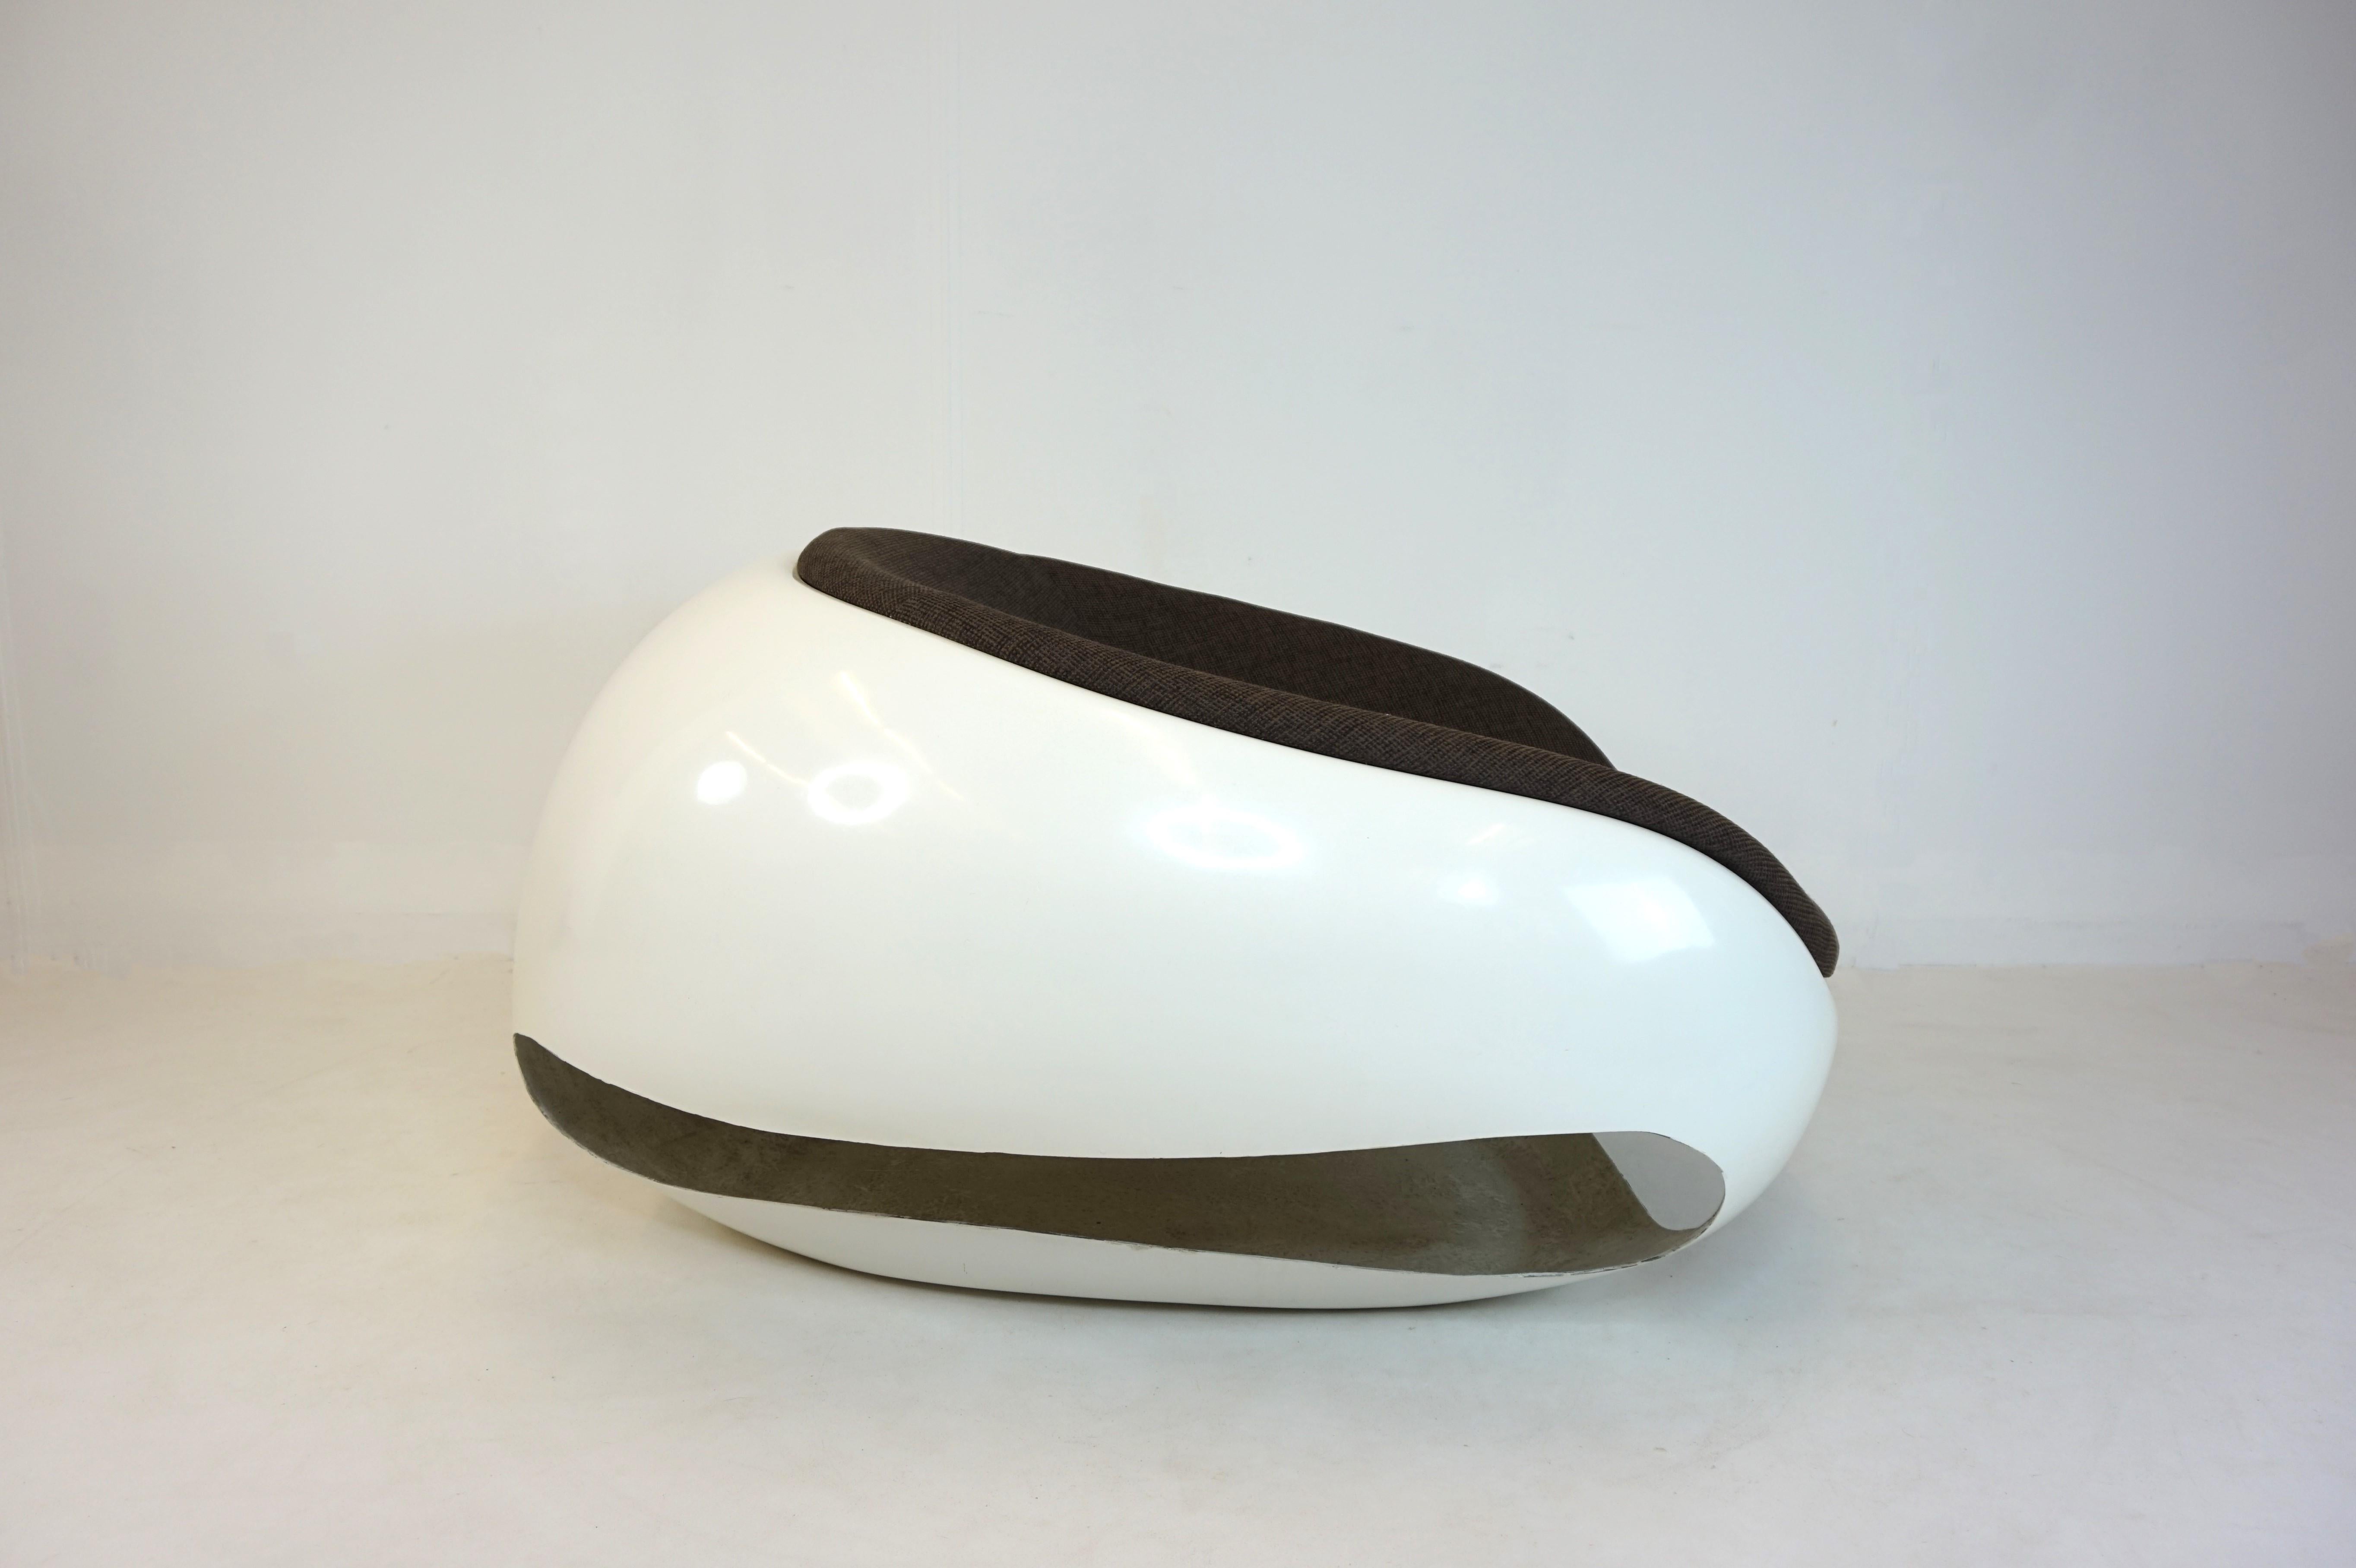 Designed in an organic shape, this space age armchair is in excellent condition. The white fiberglass shell shows minimal signs of wear, as does the brown mottled cotton fabric of the seat shell. This hard to find chair offers a fantastic seating